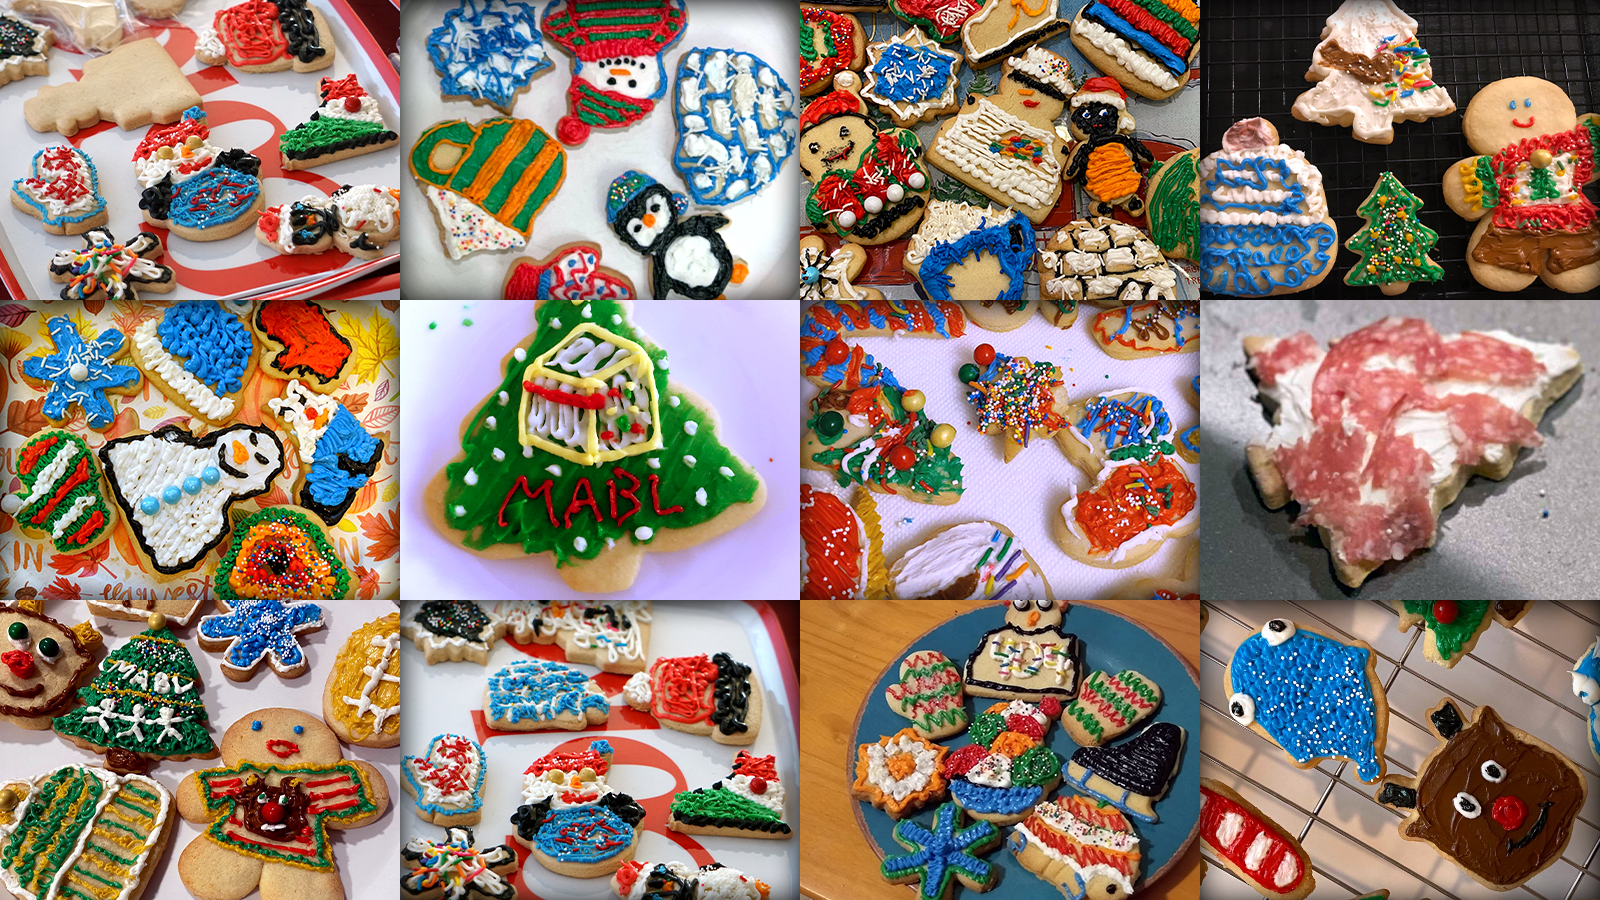 A collage of all sorts of decorated Christmas sugar cookies.